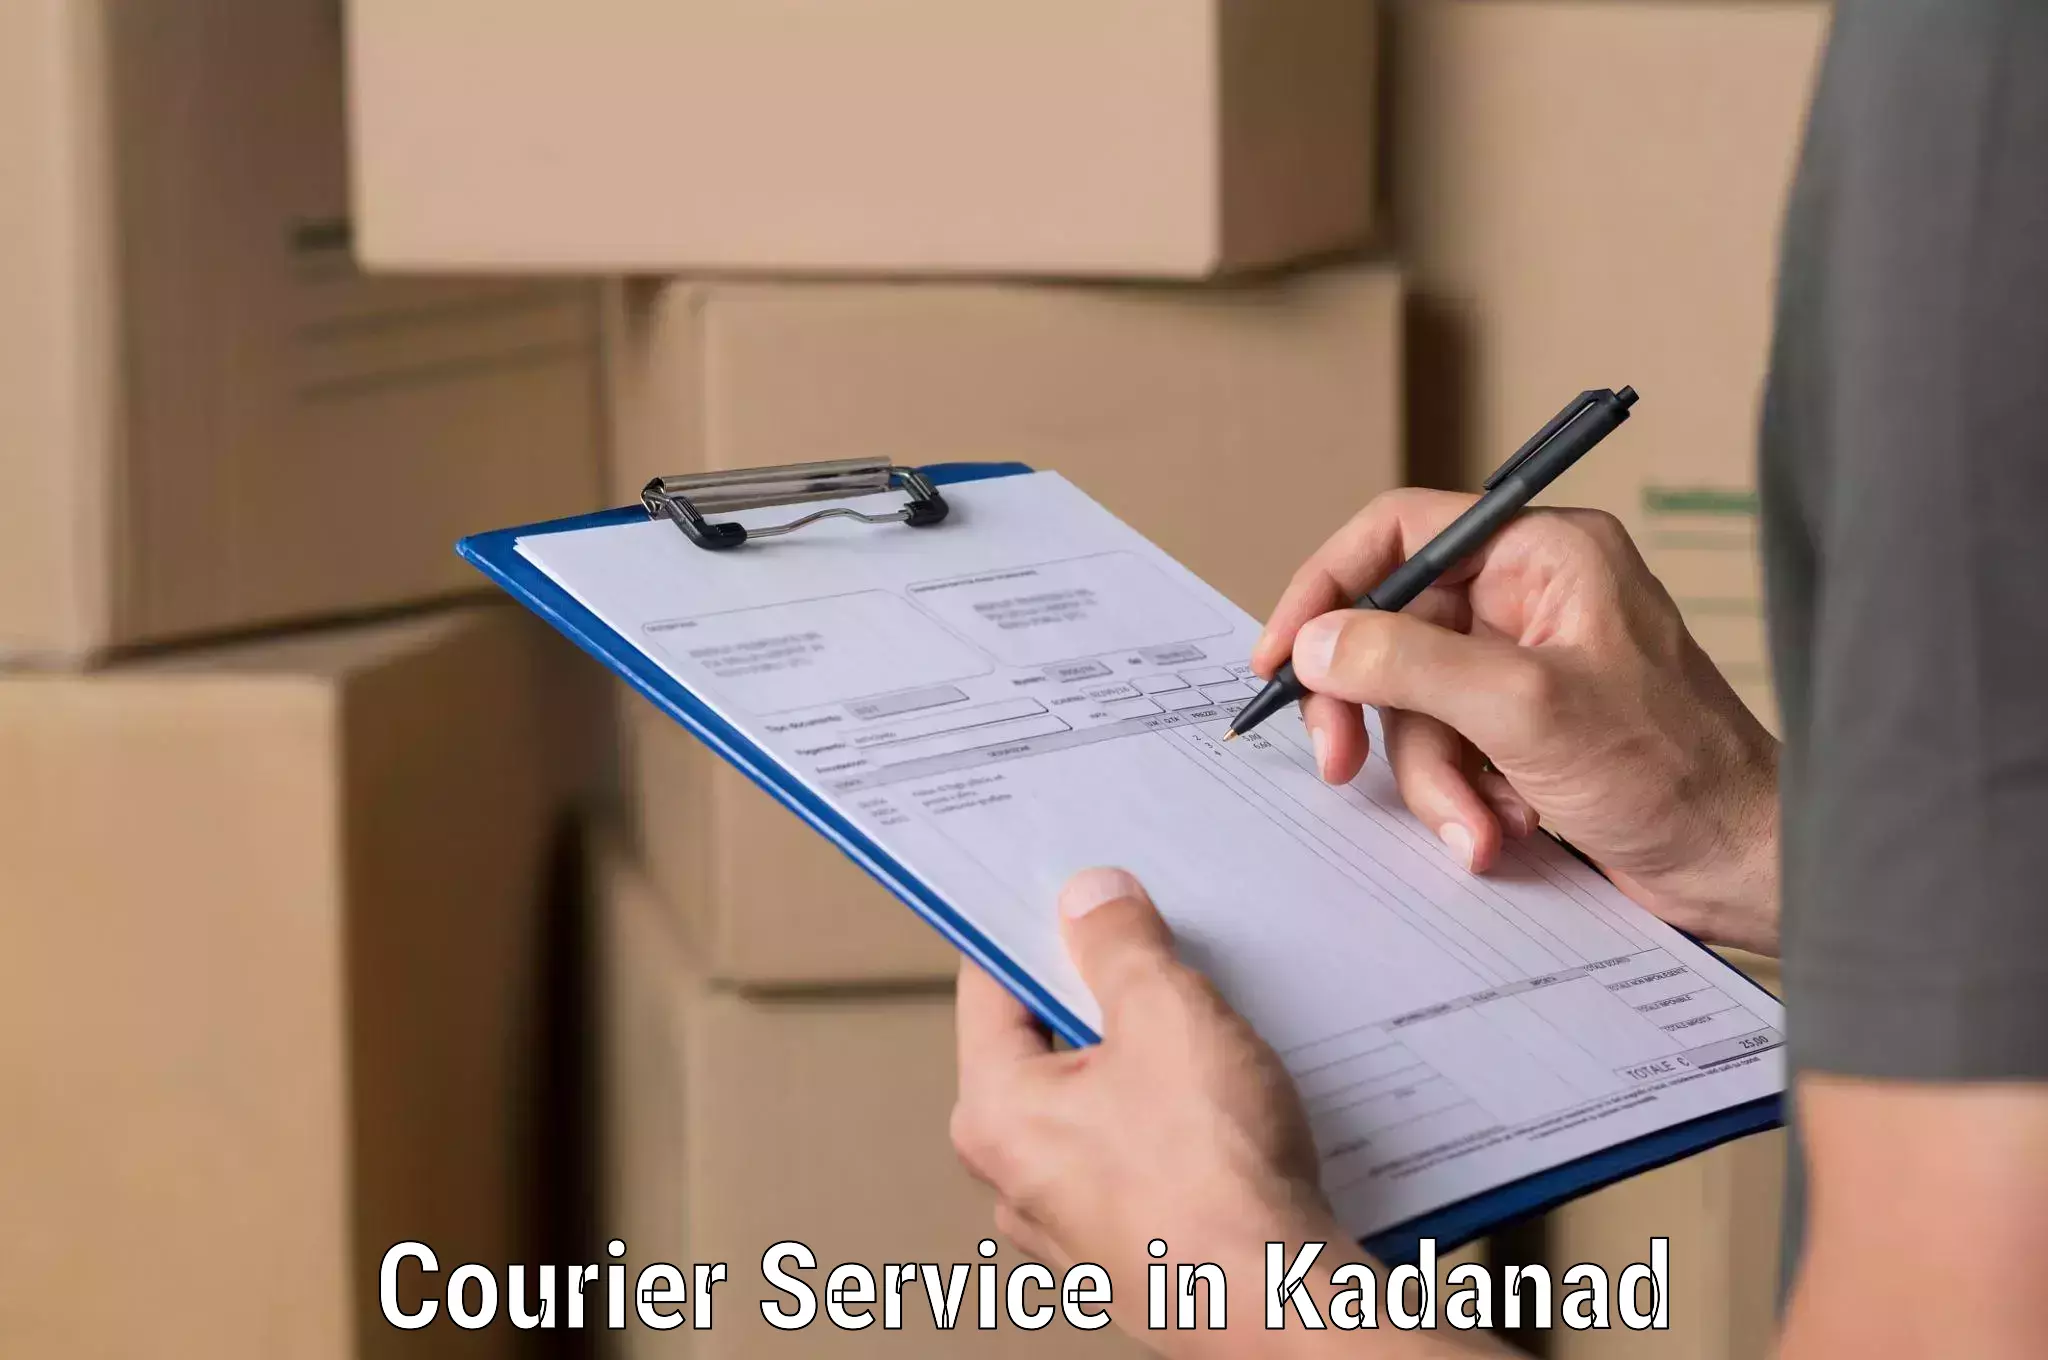 Comprehensive freight services in Kadanad